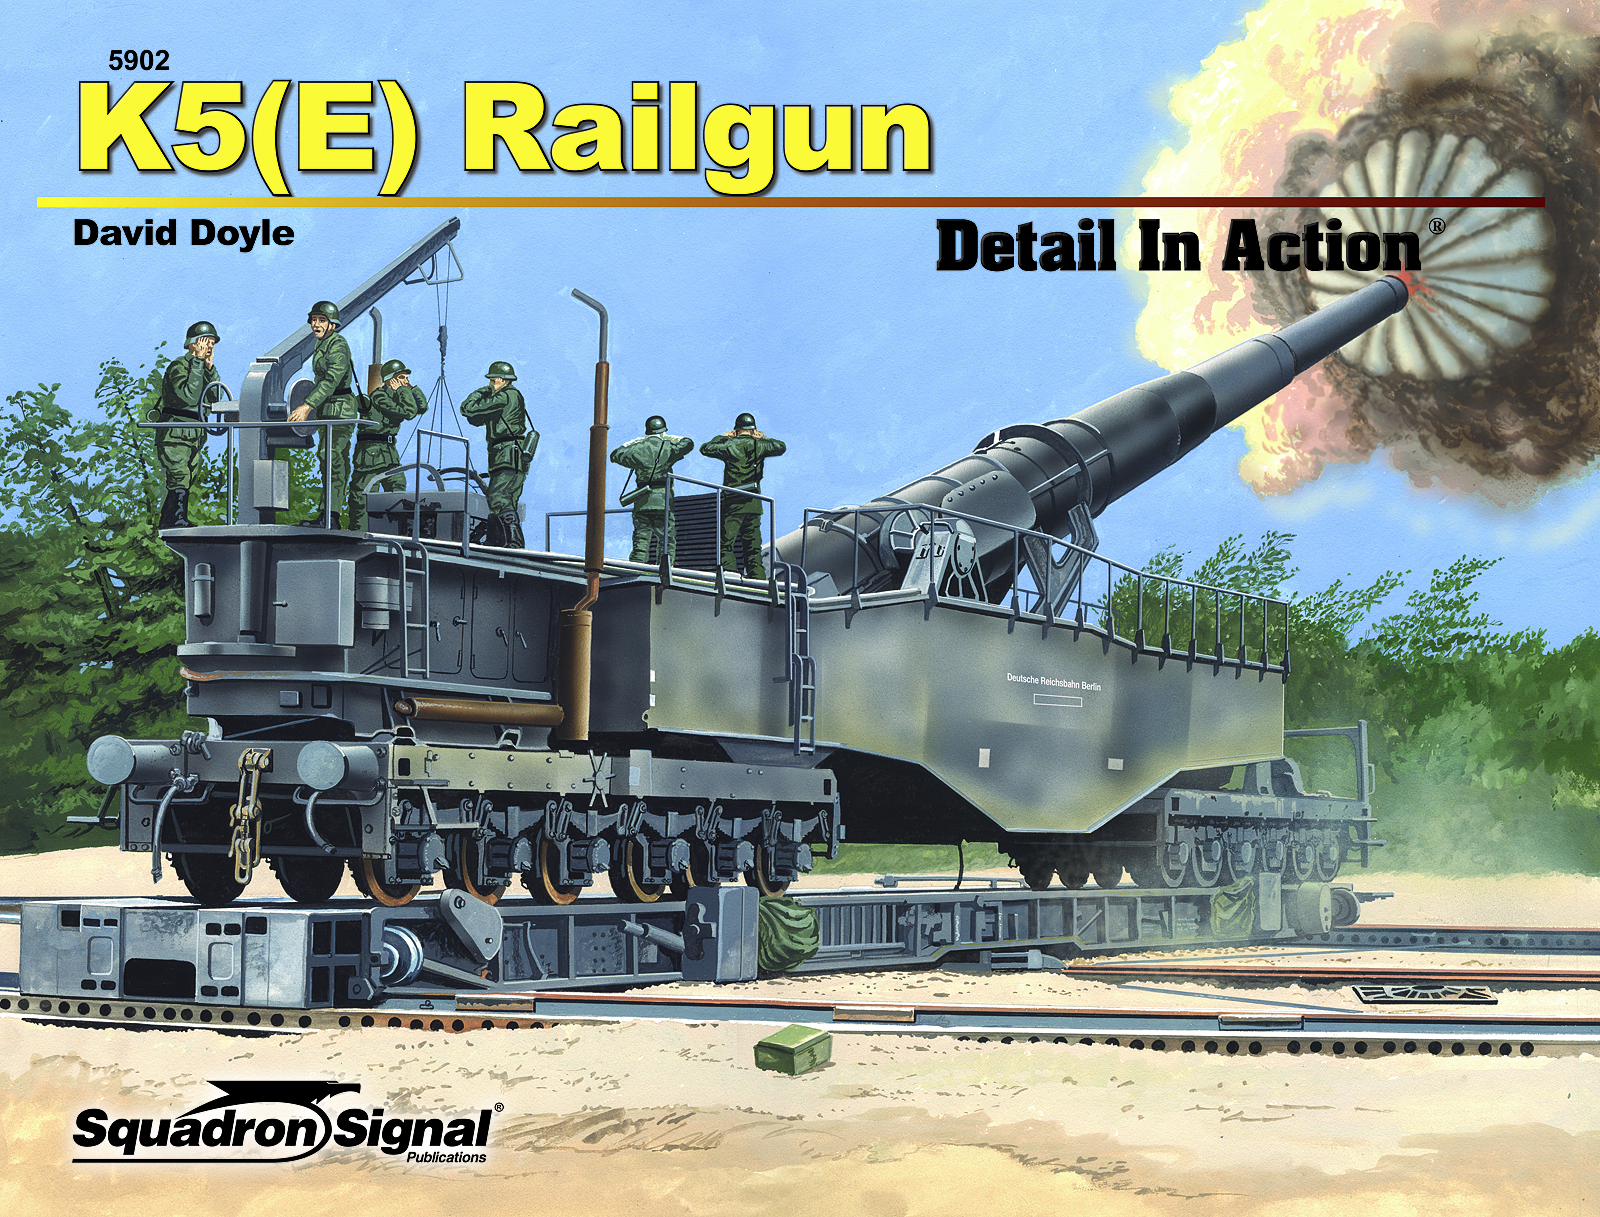 Details action. Squadron Signal in Action. Squadron Signal. Railway Gun in Action. Railway Gun in Action k5.